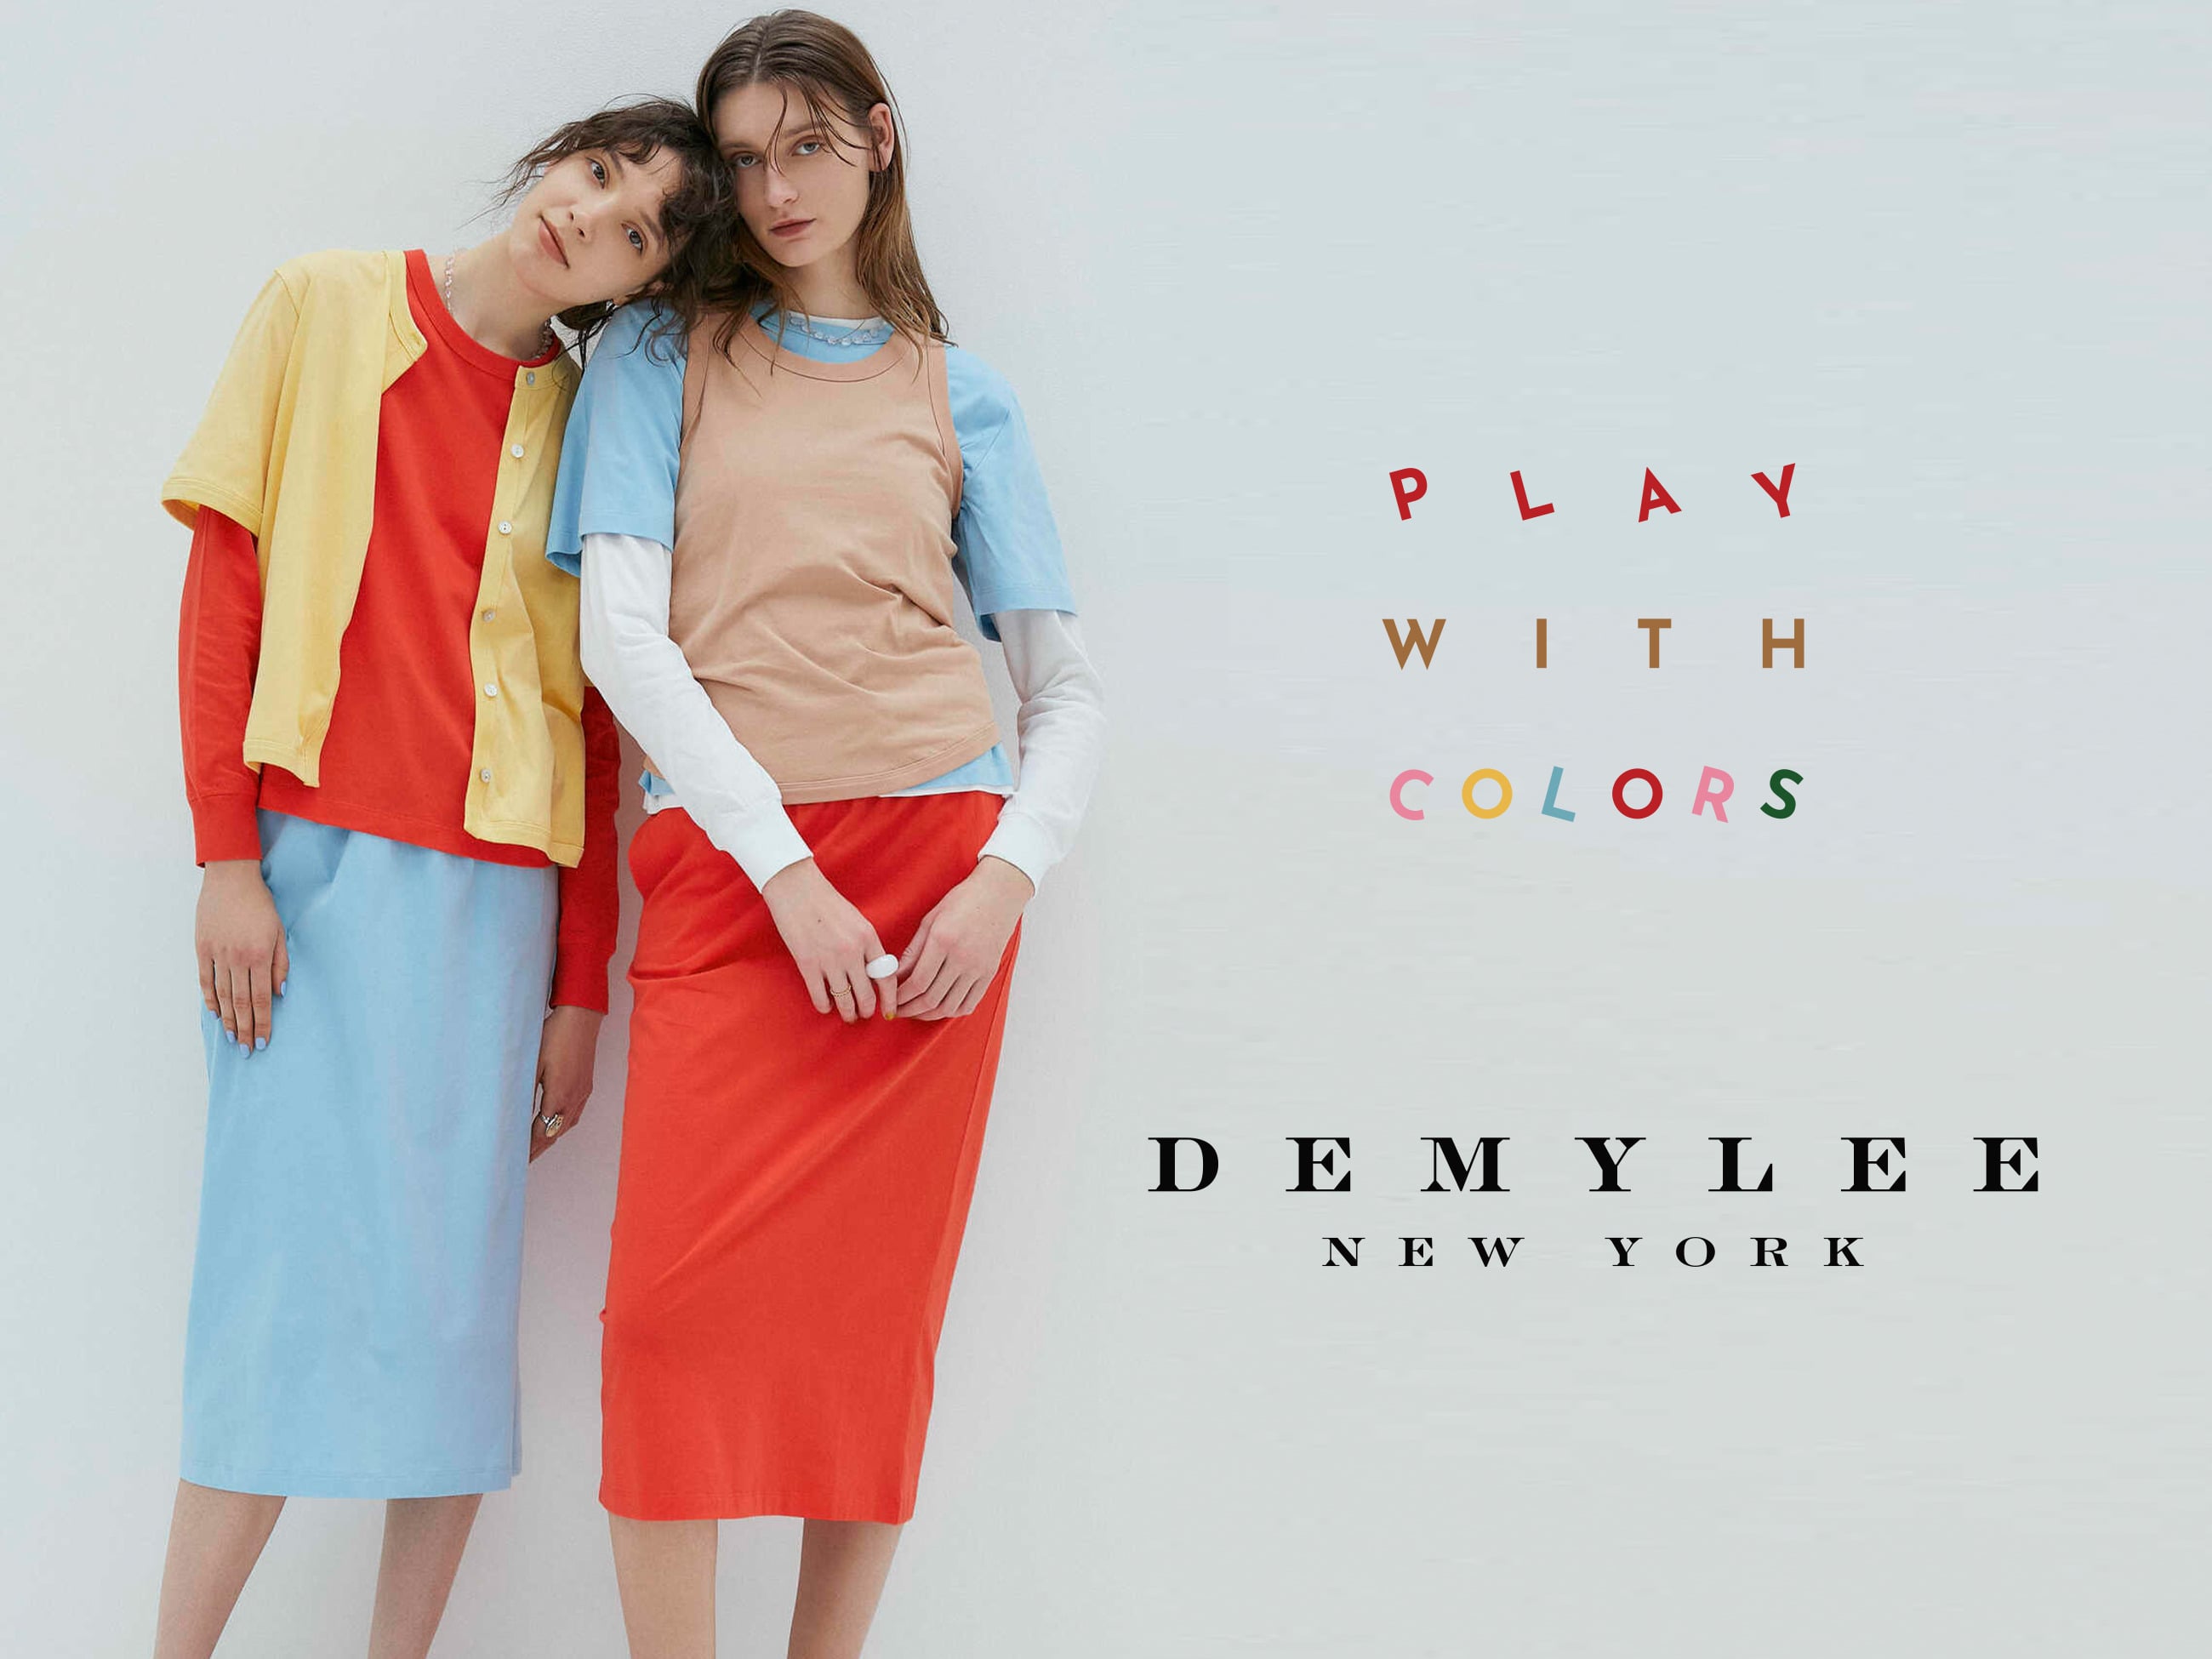 DEMYLEE New Collection "Play with Colors" 